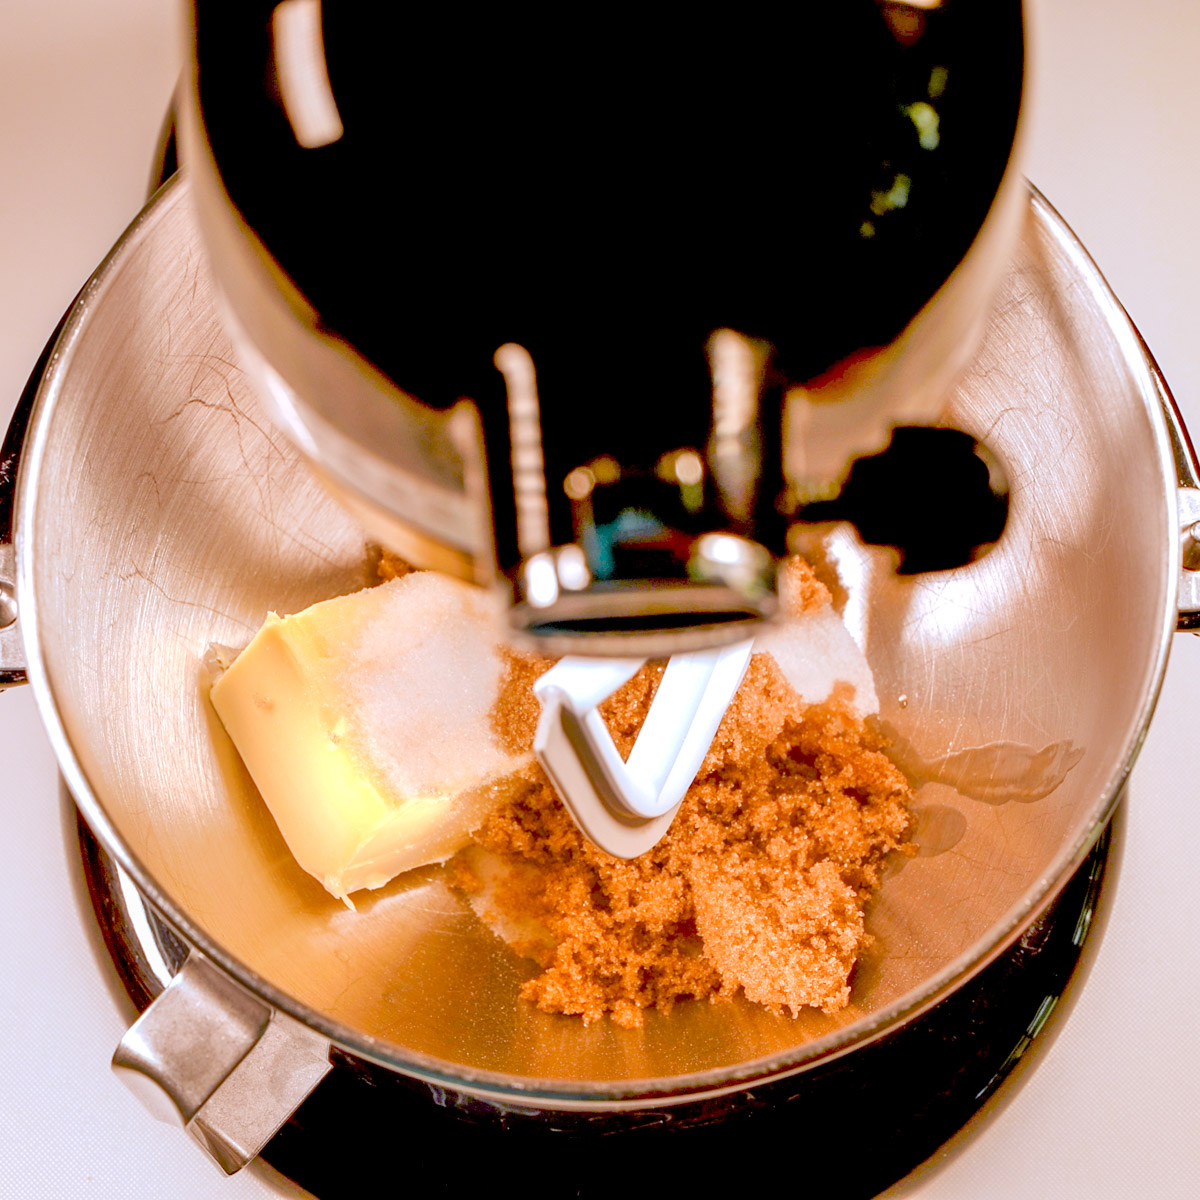 Mix the butter and brown sugar in a stand mixer.